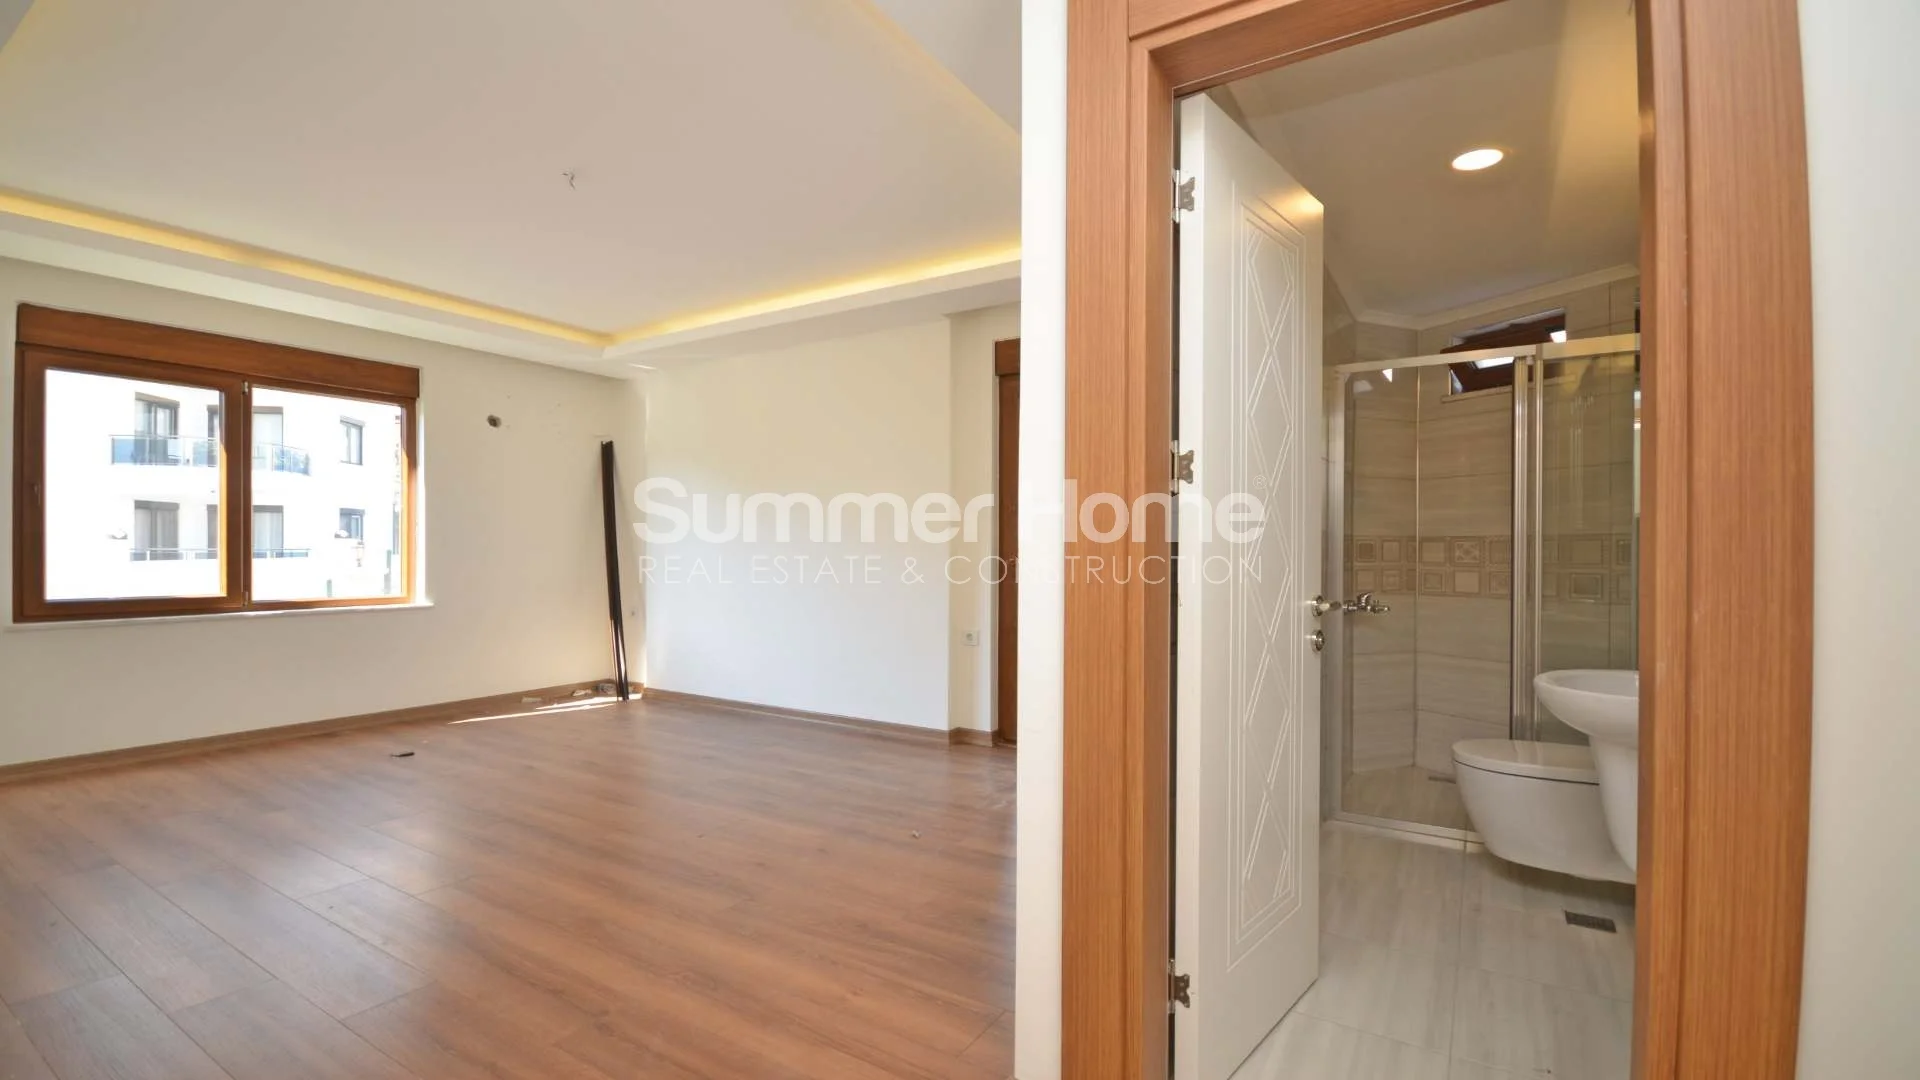 For sale Apartment Alanya Hasbahce Interior - 20